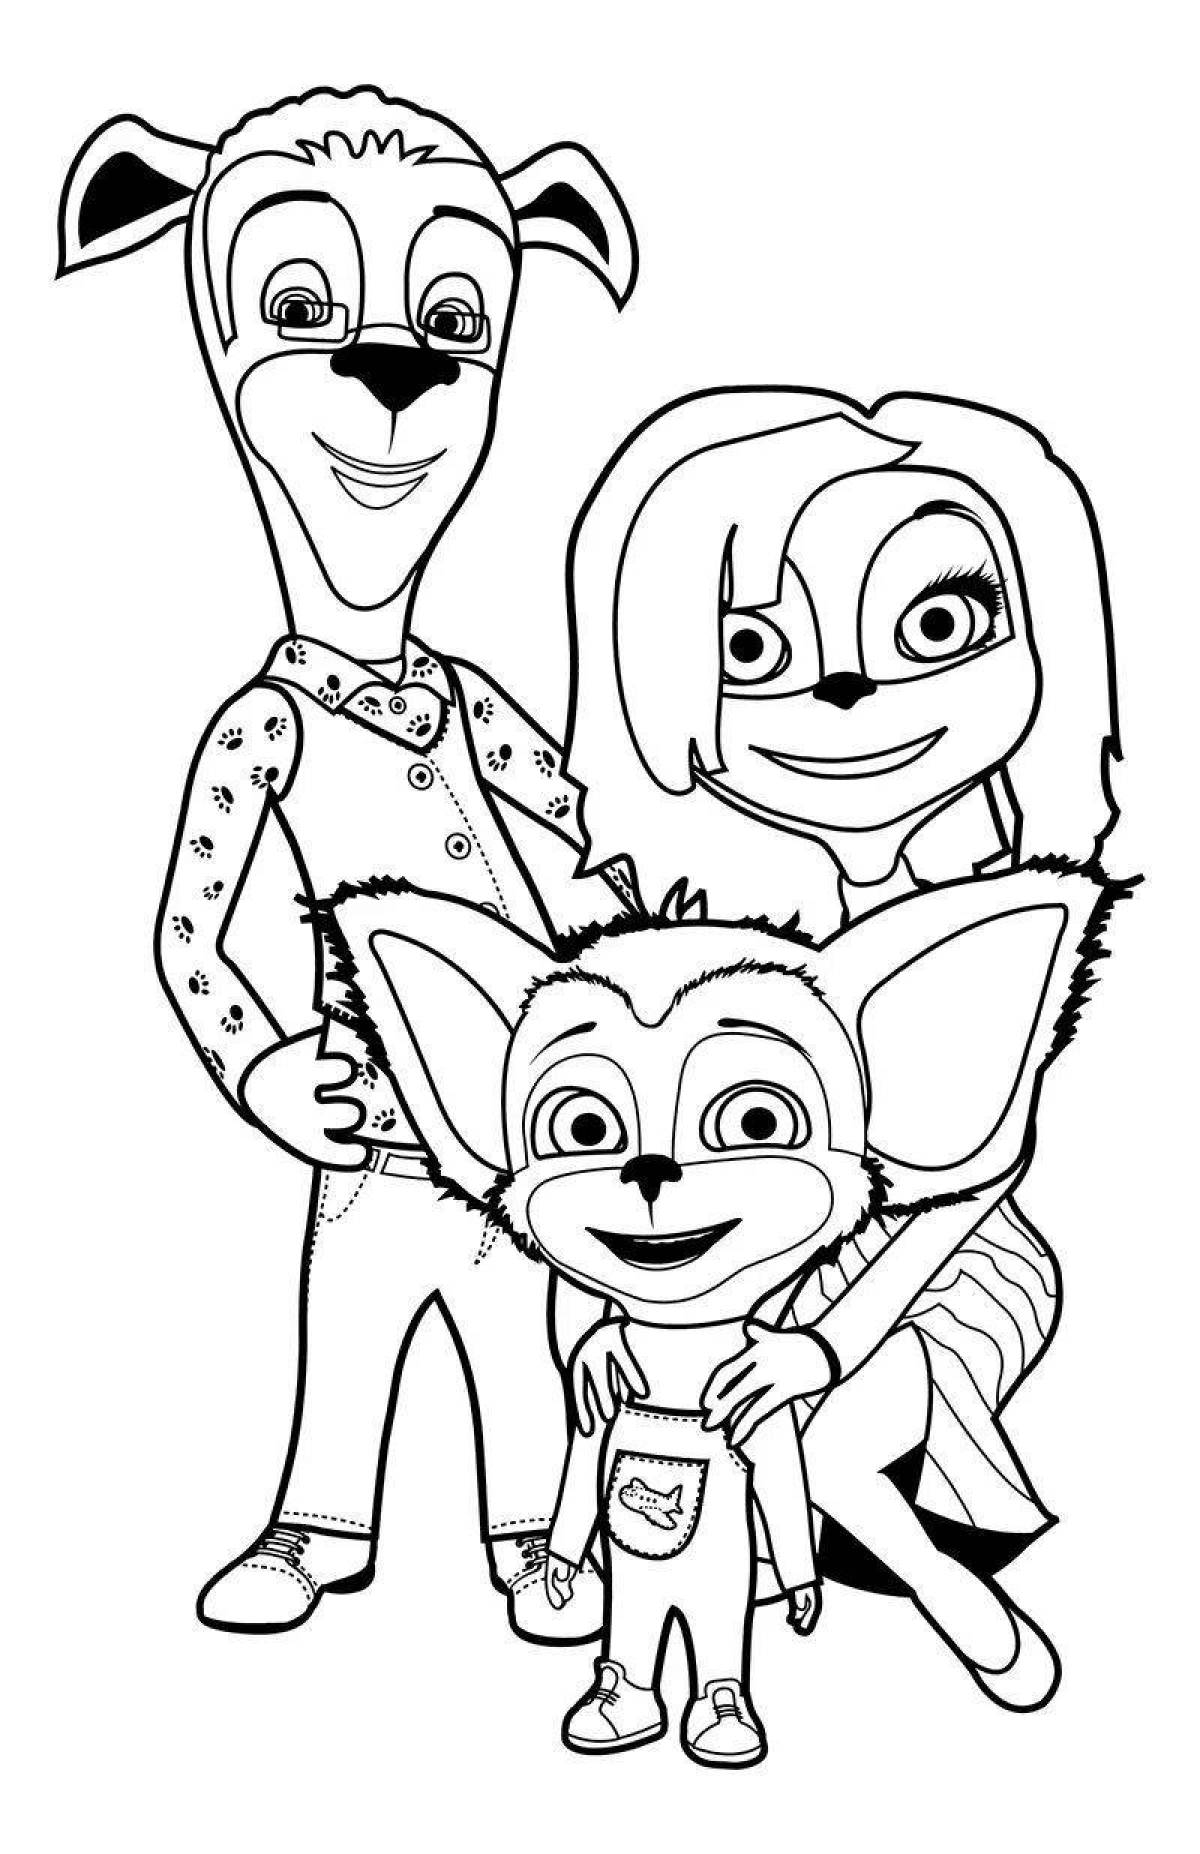 Fancy barboskin coloring pages for girls